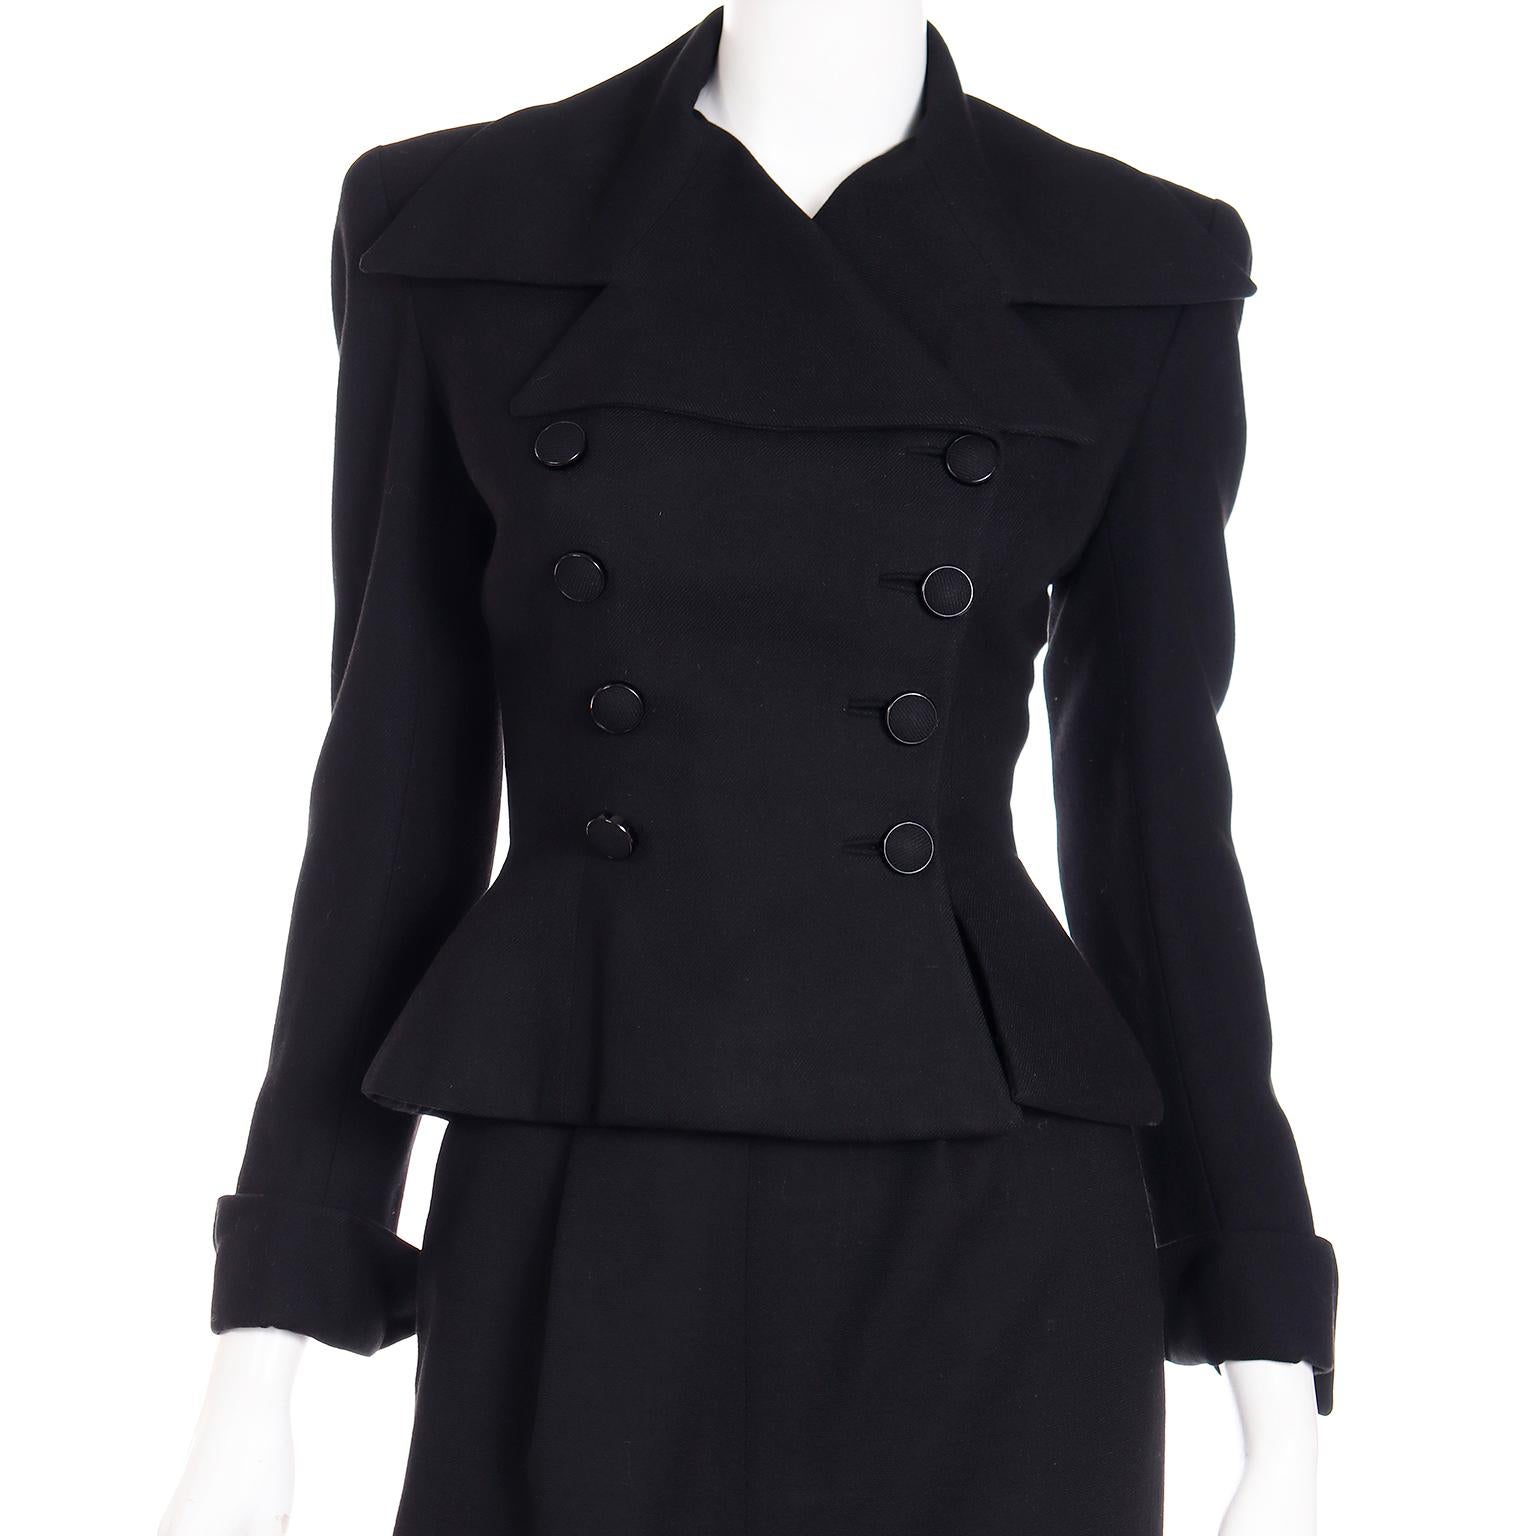 Adele Simpson Vintage 1947/48 Black Double Breasted Cinched Waist Jacket & Skirt For Sale 5